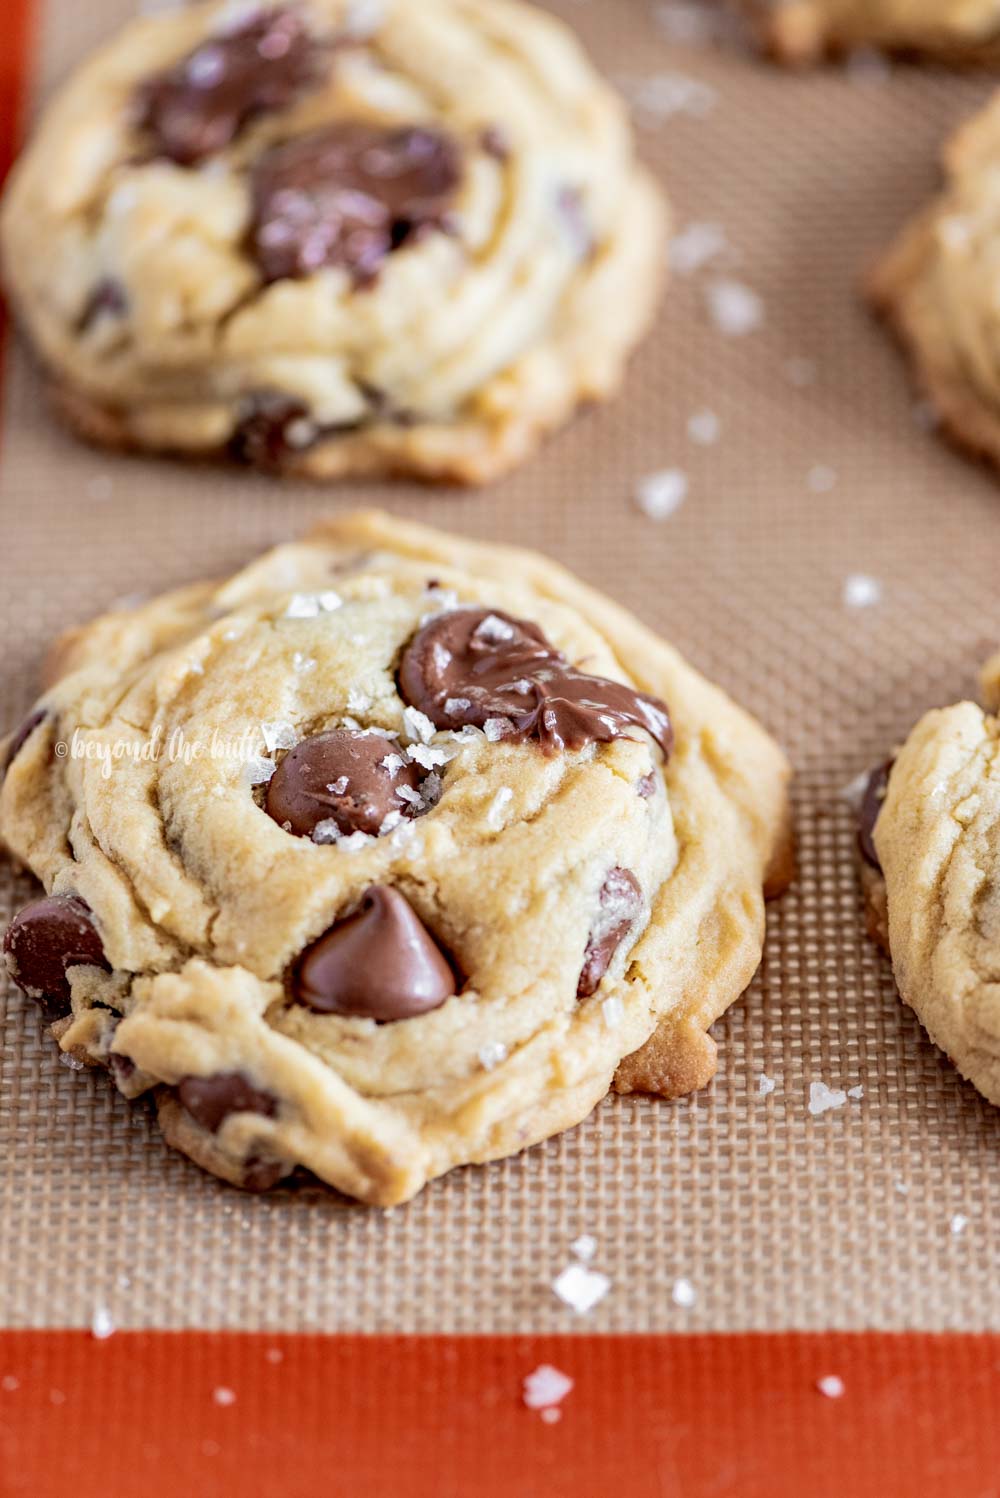 Super Soft Chocolate Chip Cookies recipe | All Images © Beyond the Butter, LLC